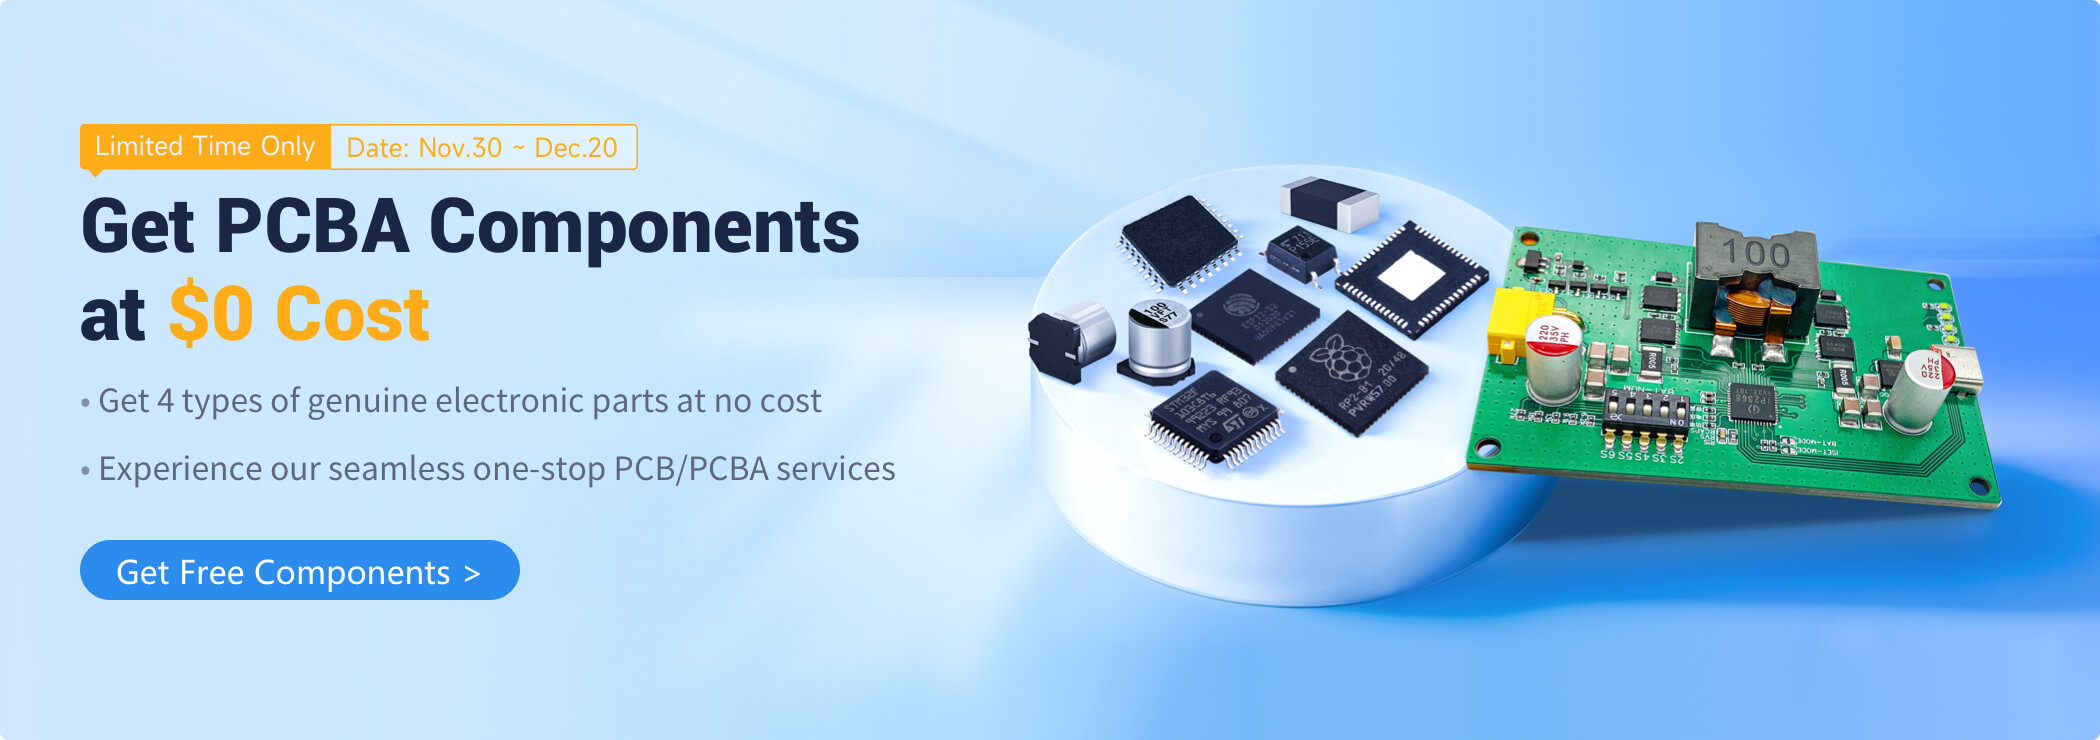 Get Free PCBA Components